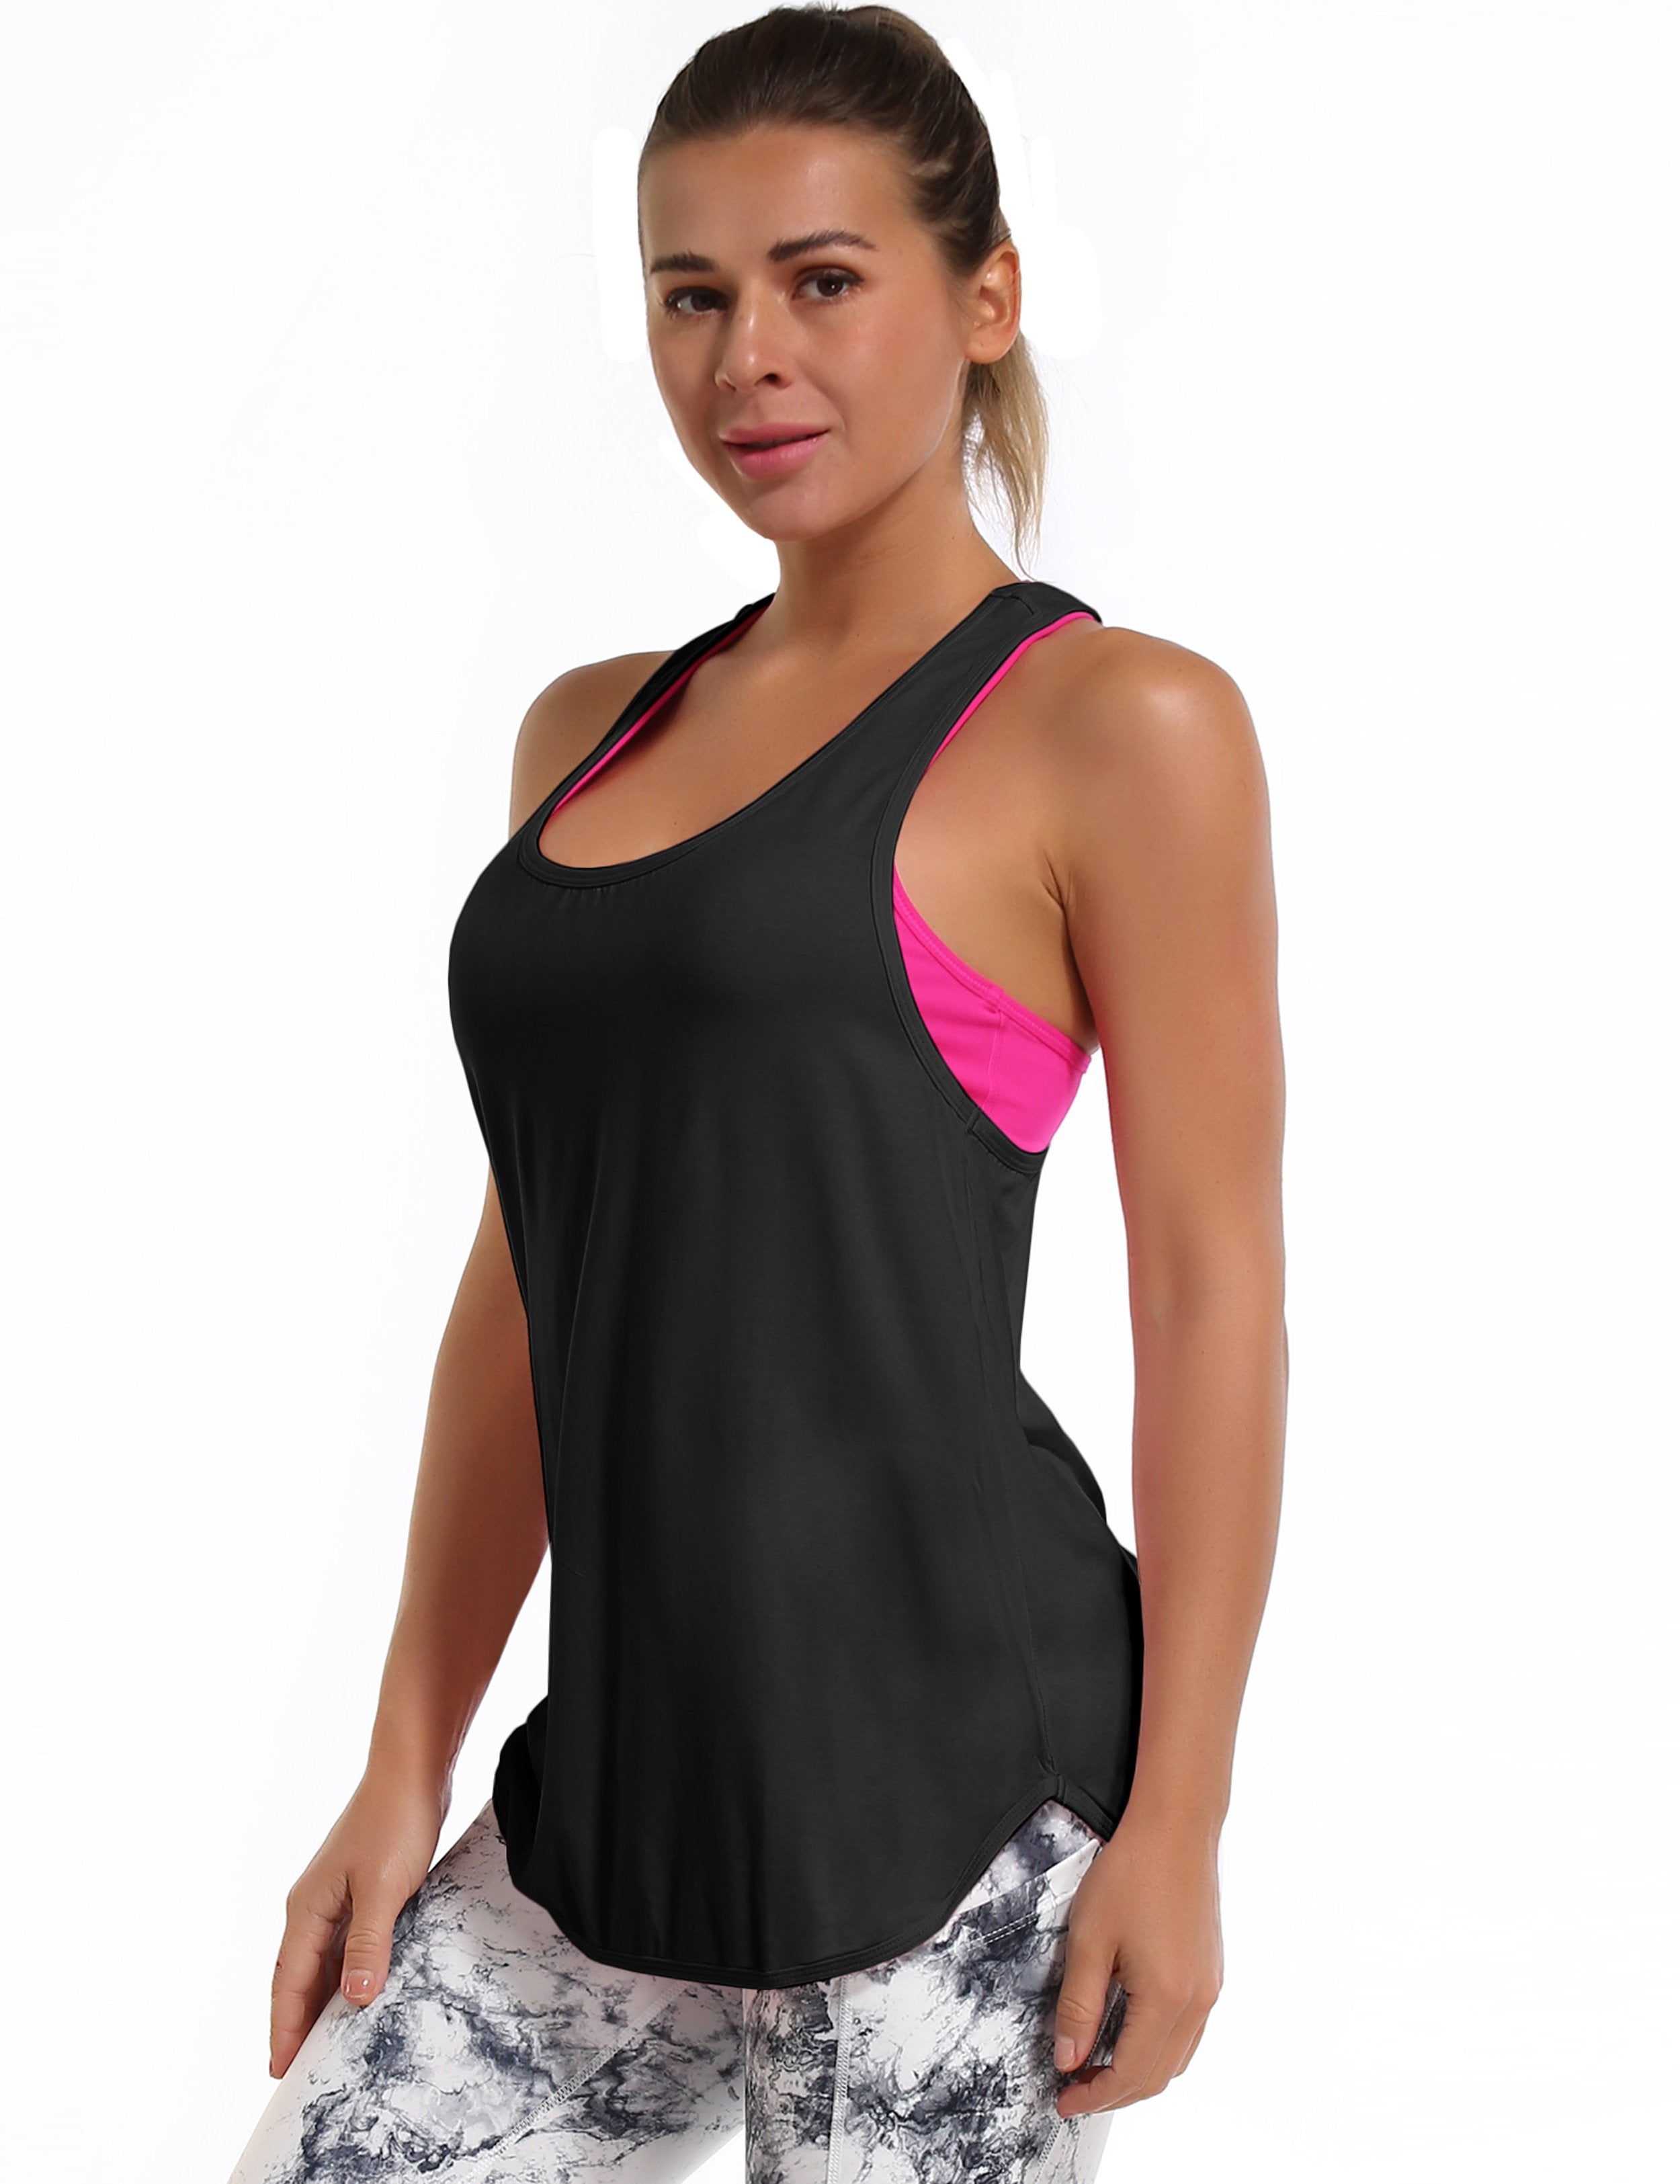 Loose Fit Racerback Tank Top black Designed for On the Move Loose fit 93%Modal/7%Spandex Four-way stretch Naturally breathable Super-Soft, Modal Fabric